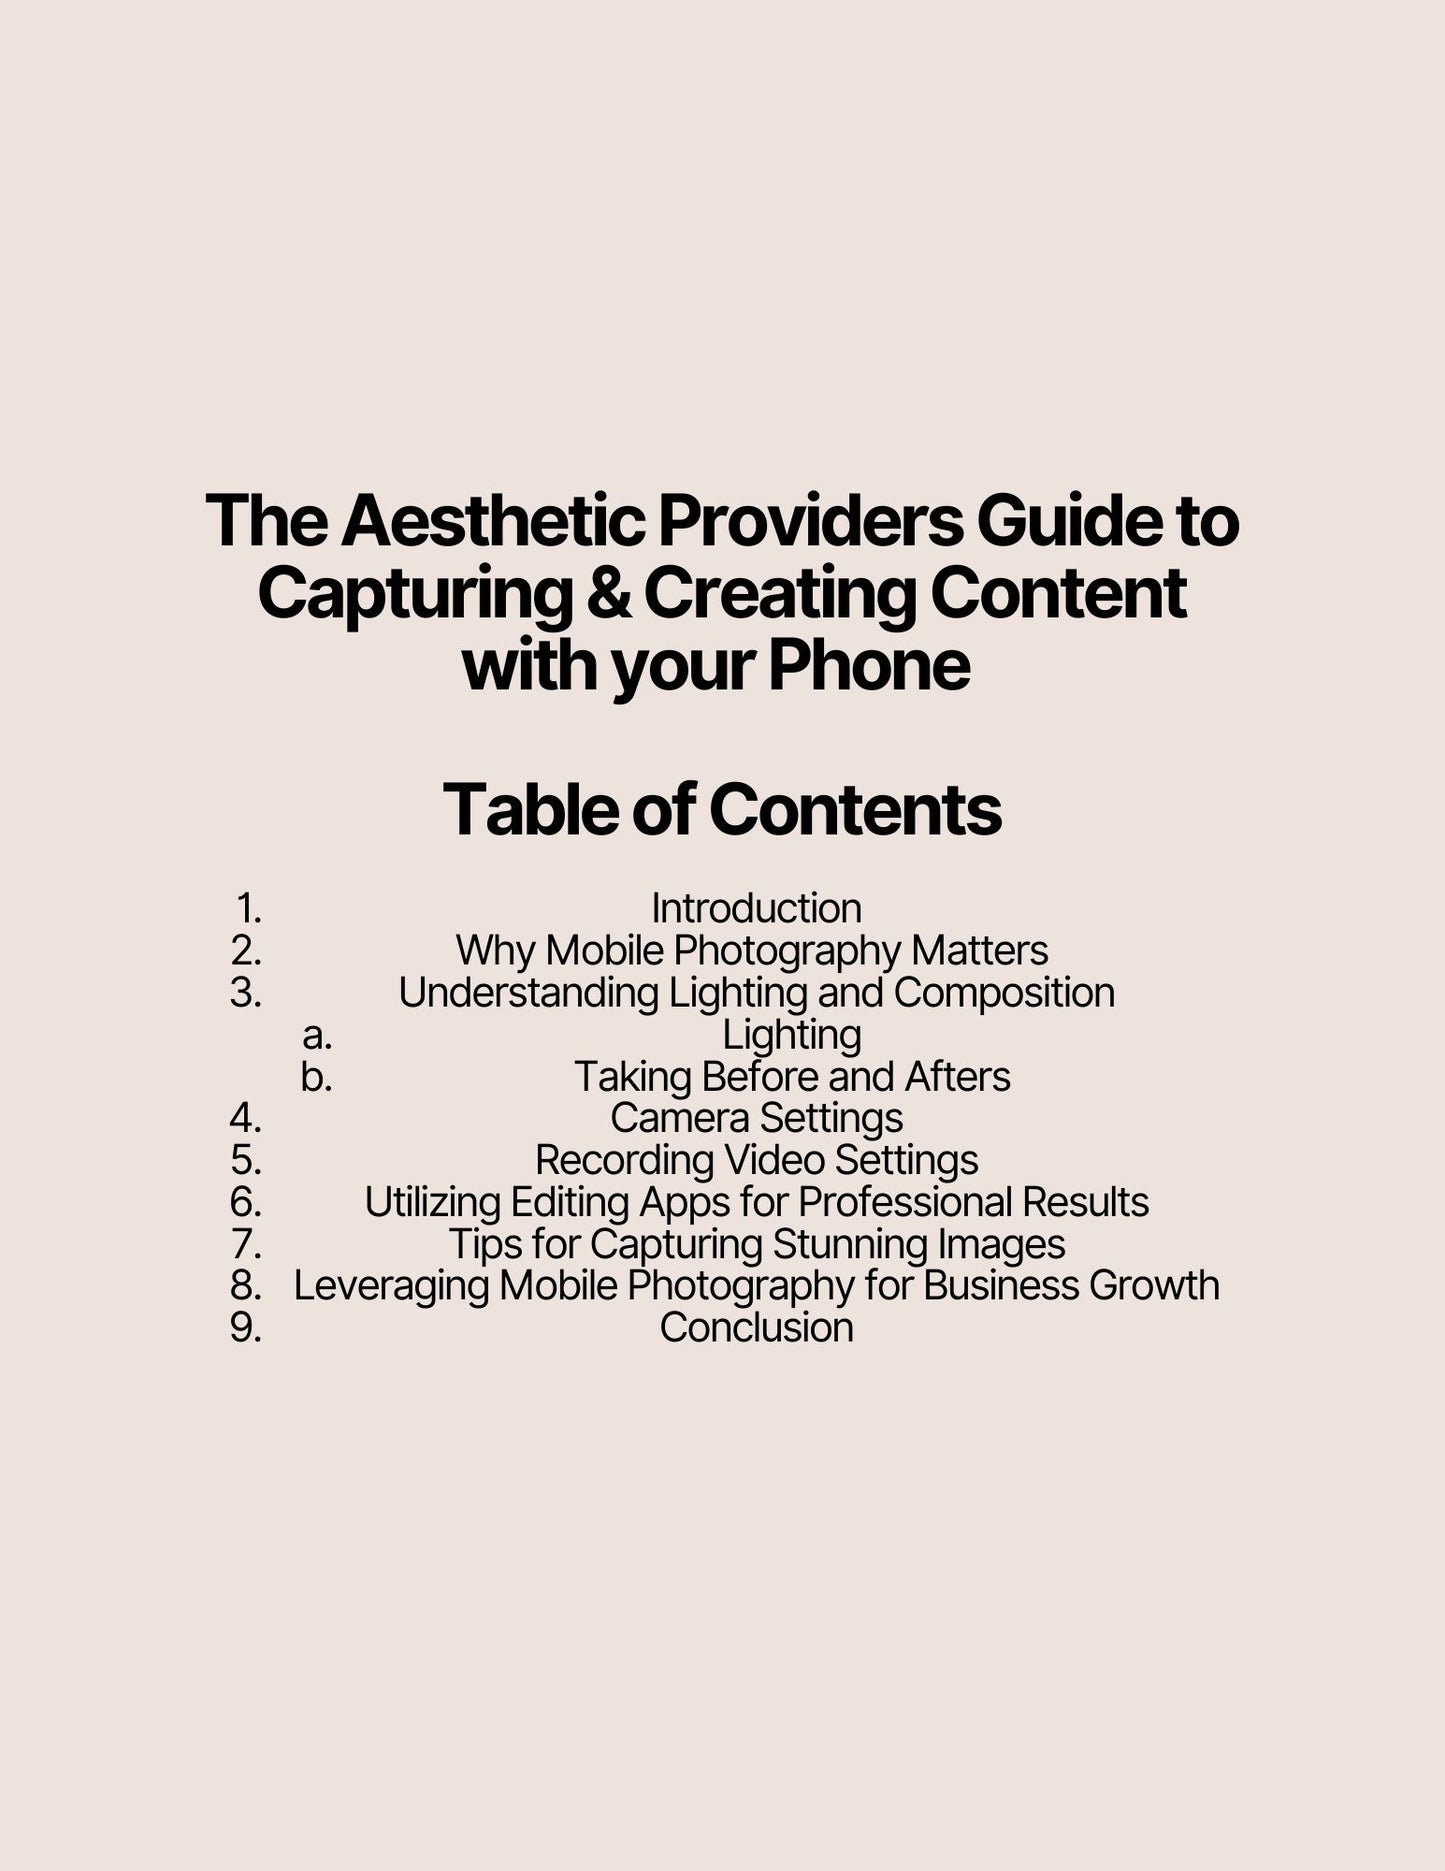 The Aesthetic Provider's Guide to Capturing and Creating Content on Your Phone